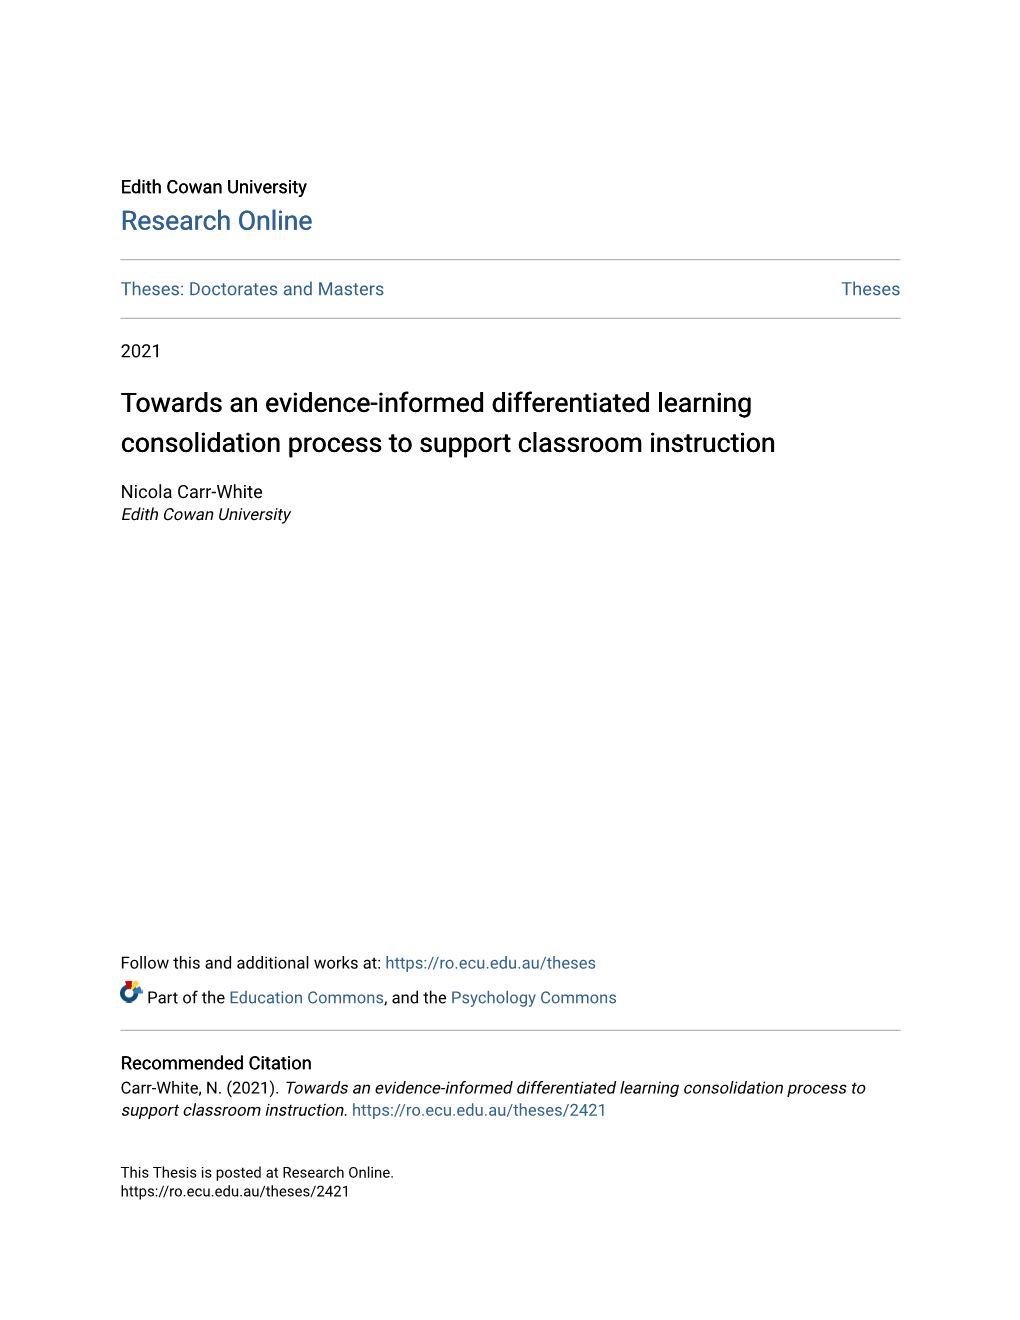 Towards an Evidence-Informed Differentiated Learning Consolidation Process to Support Classroom Instruction